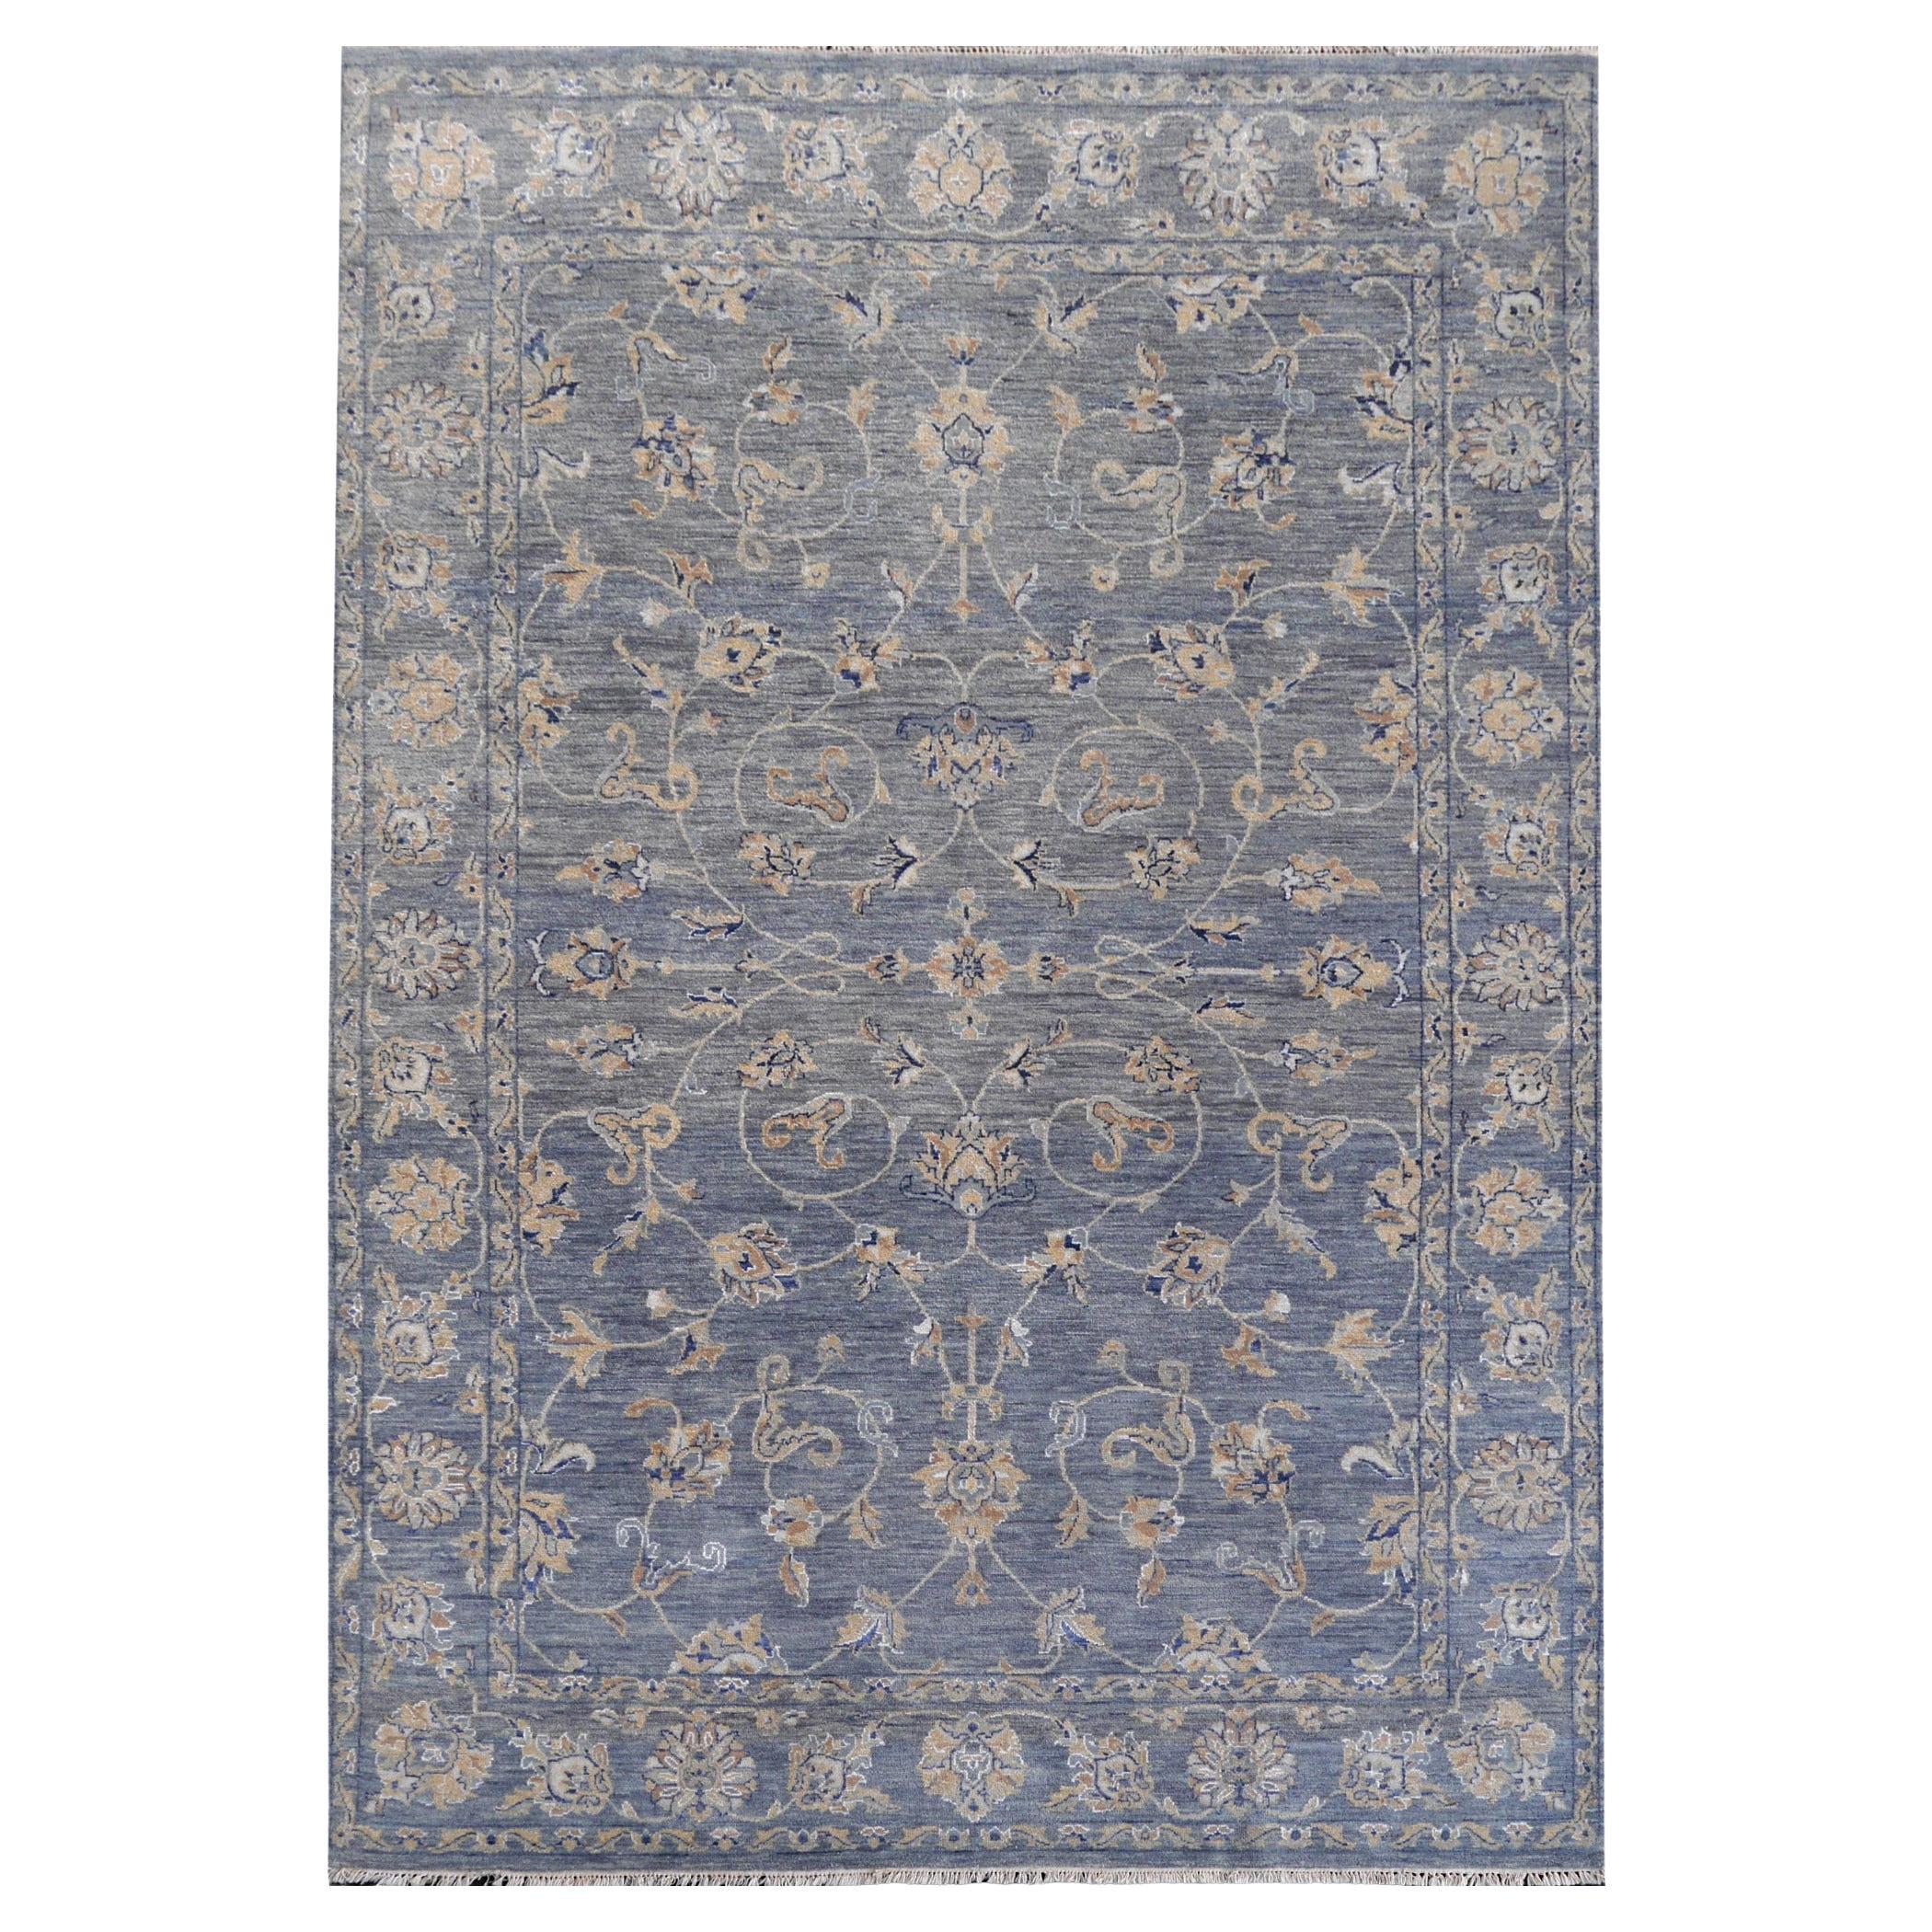 Farahan Sarouk Design Rug Contemporary Grey Blue and Beige Hand Knotted